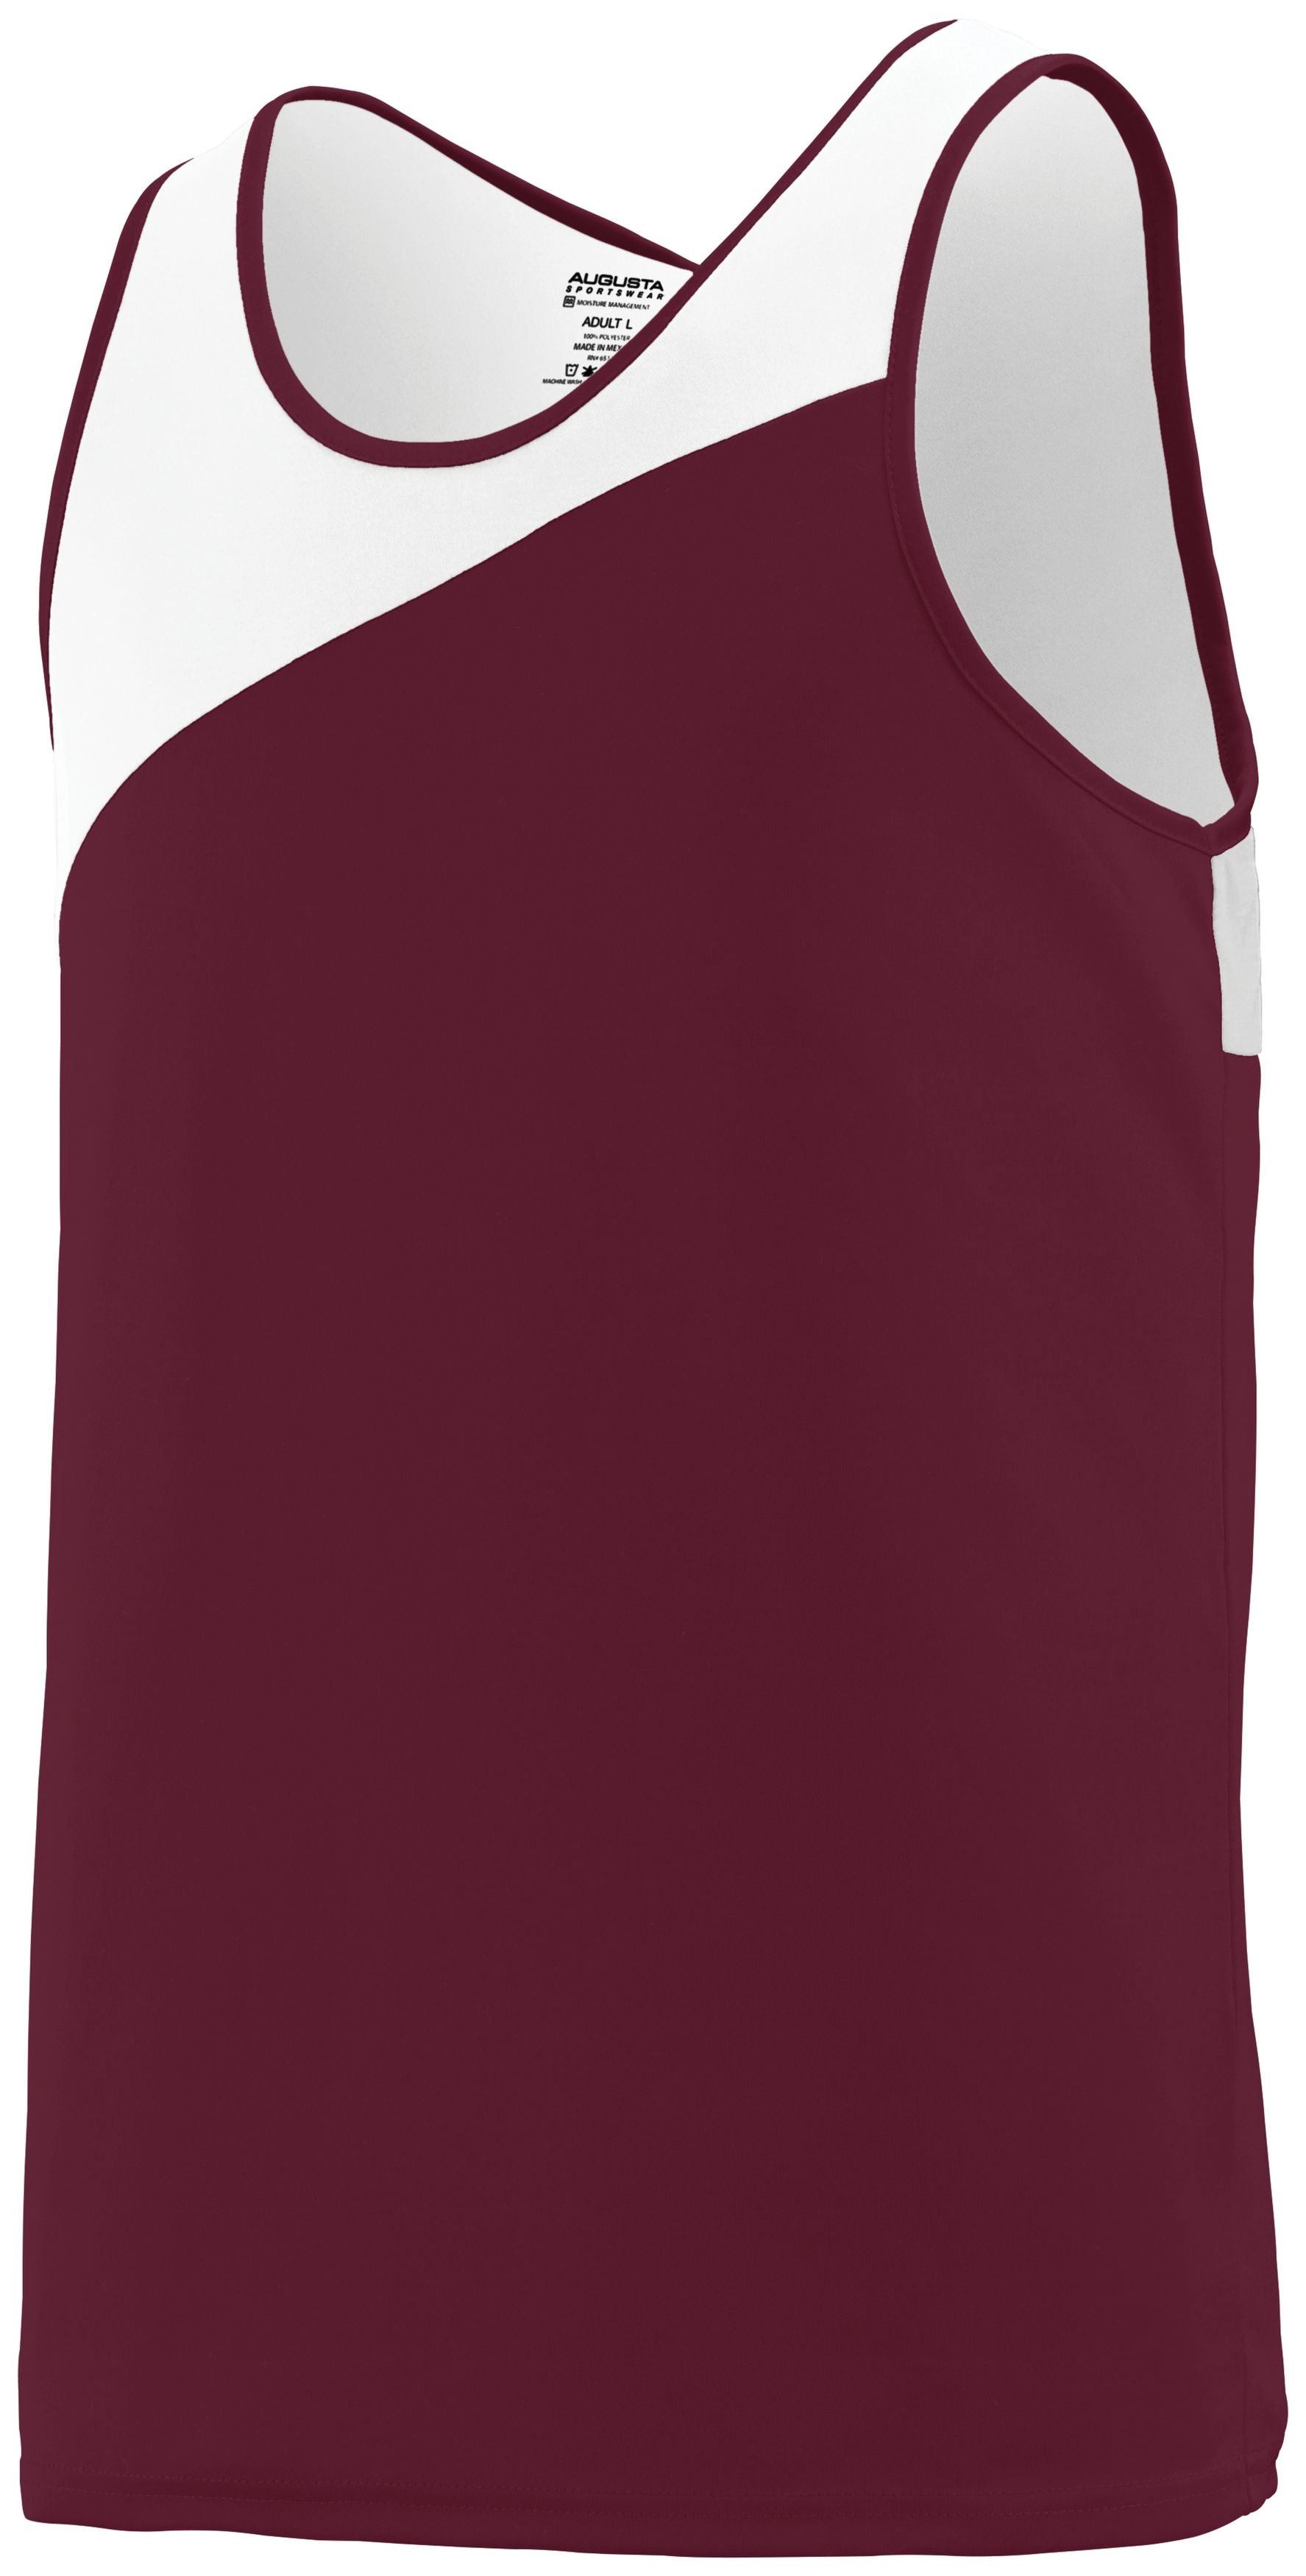 Augusta Sportswear Accelerate Jersey in Maroon/White  -Part of the Adult, Adult-Jersey, Augusta-Products, Track-Field, Shirts product lines at KanaleyCreations.com